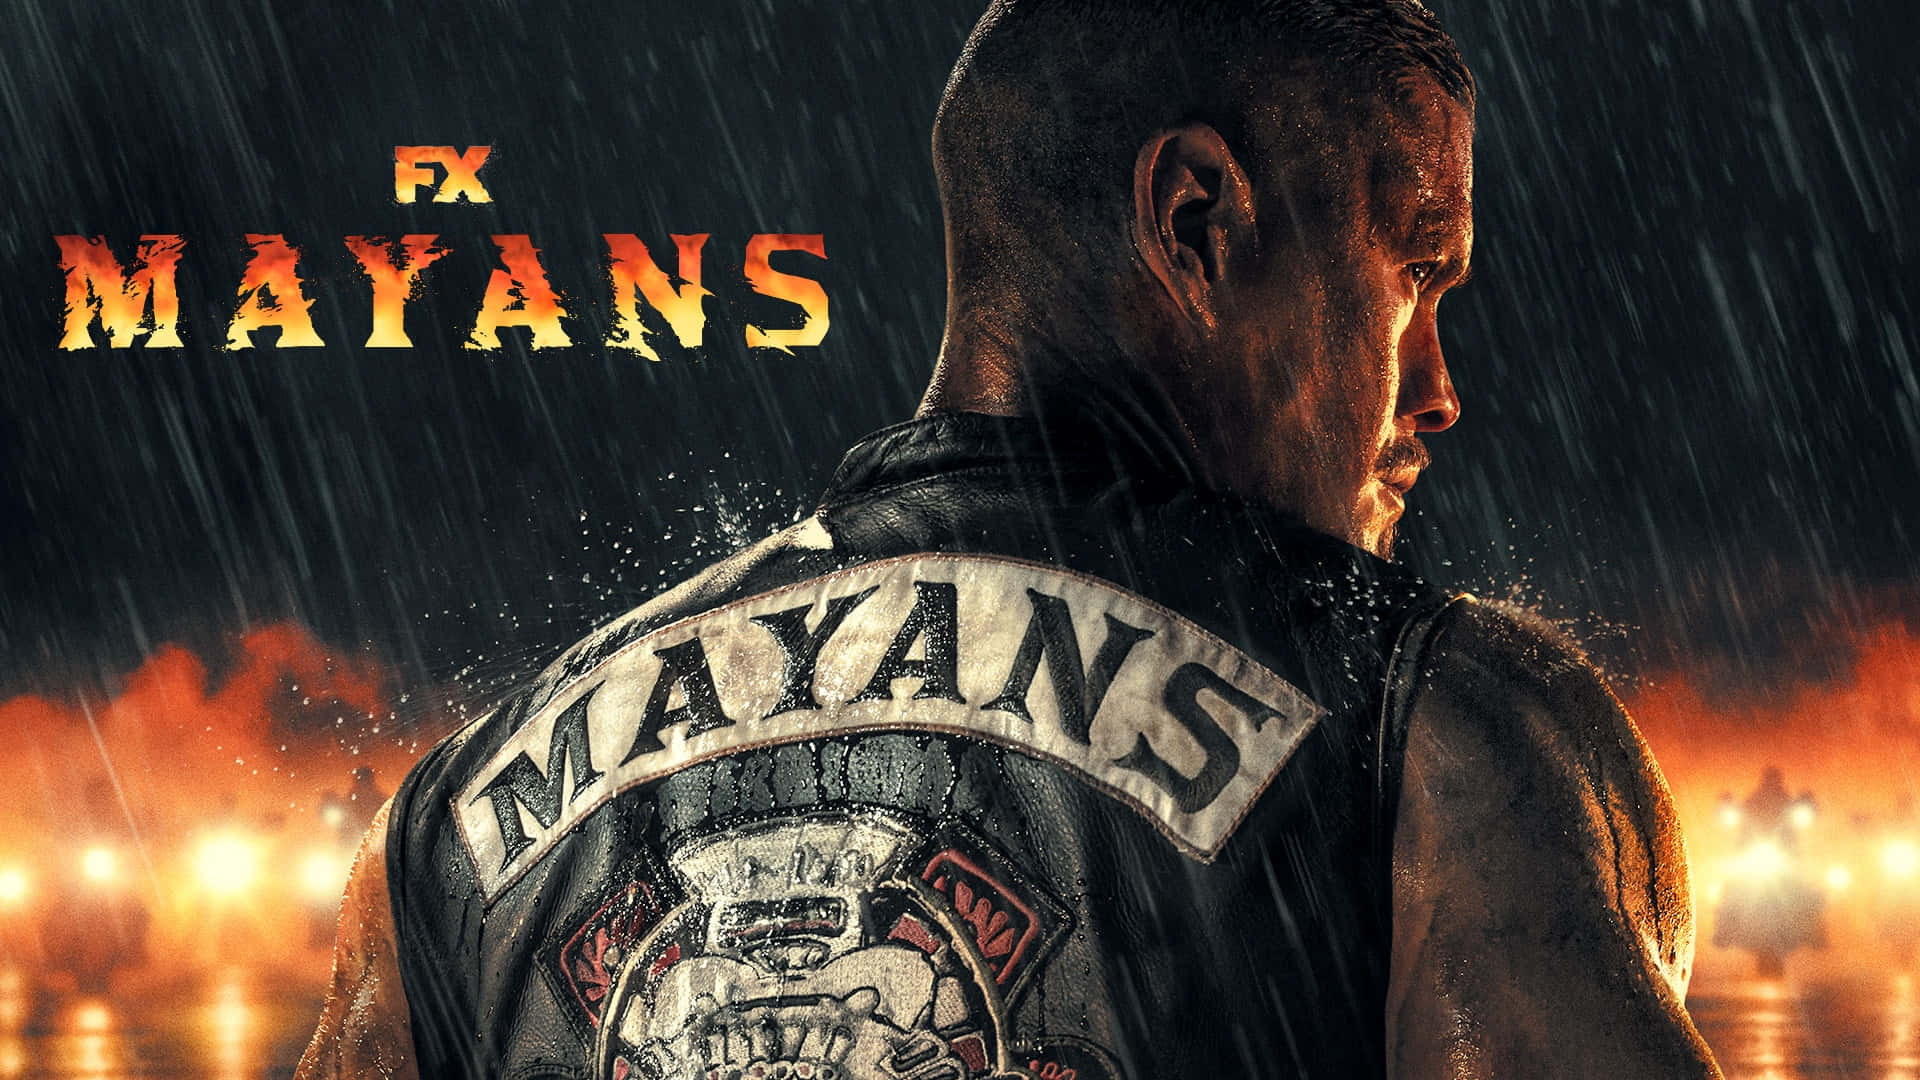 A Poster For The Movie Mayans Wallpaper